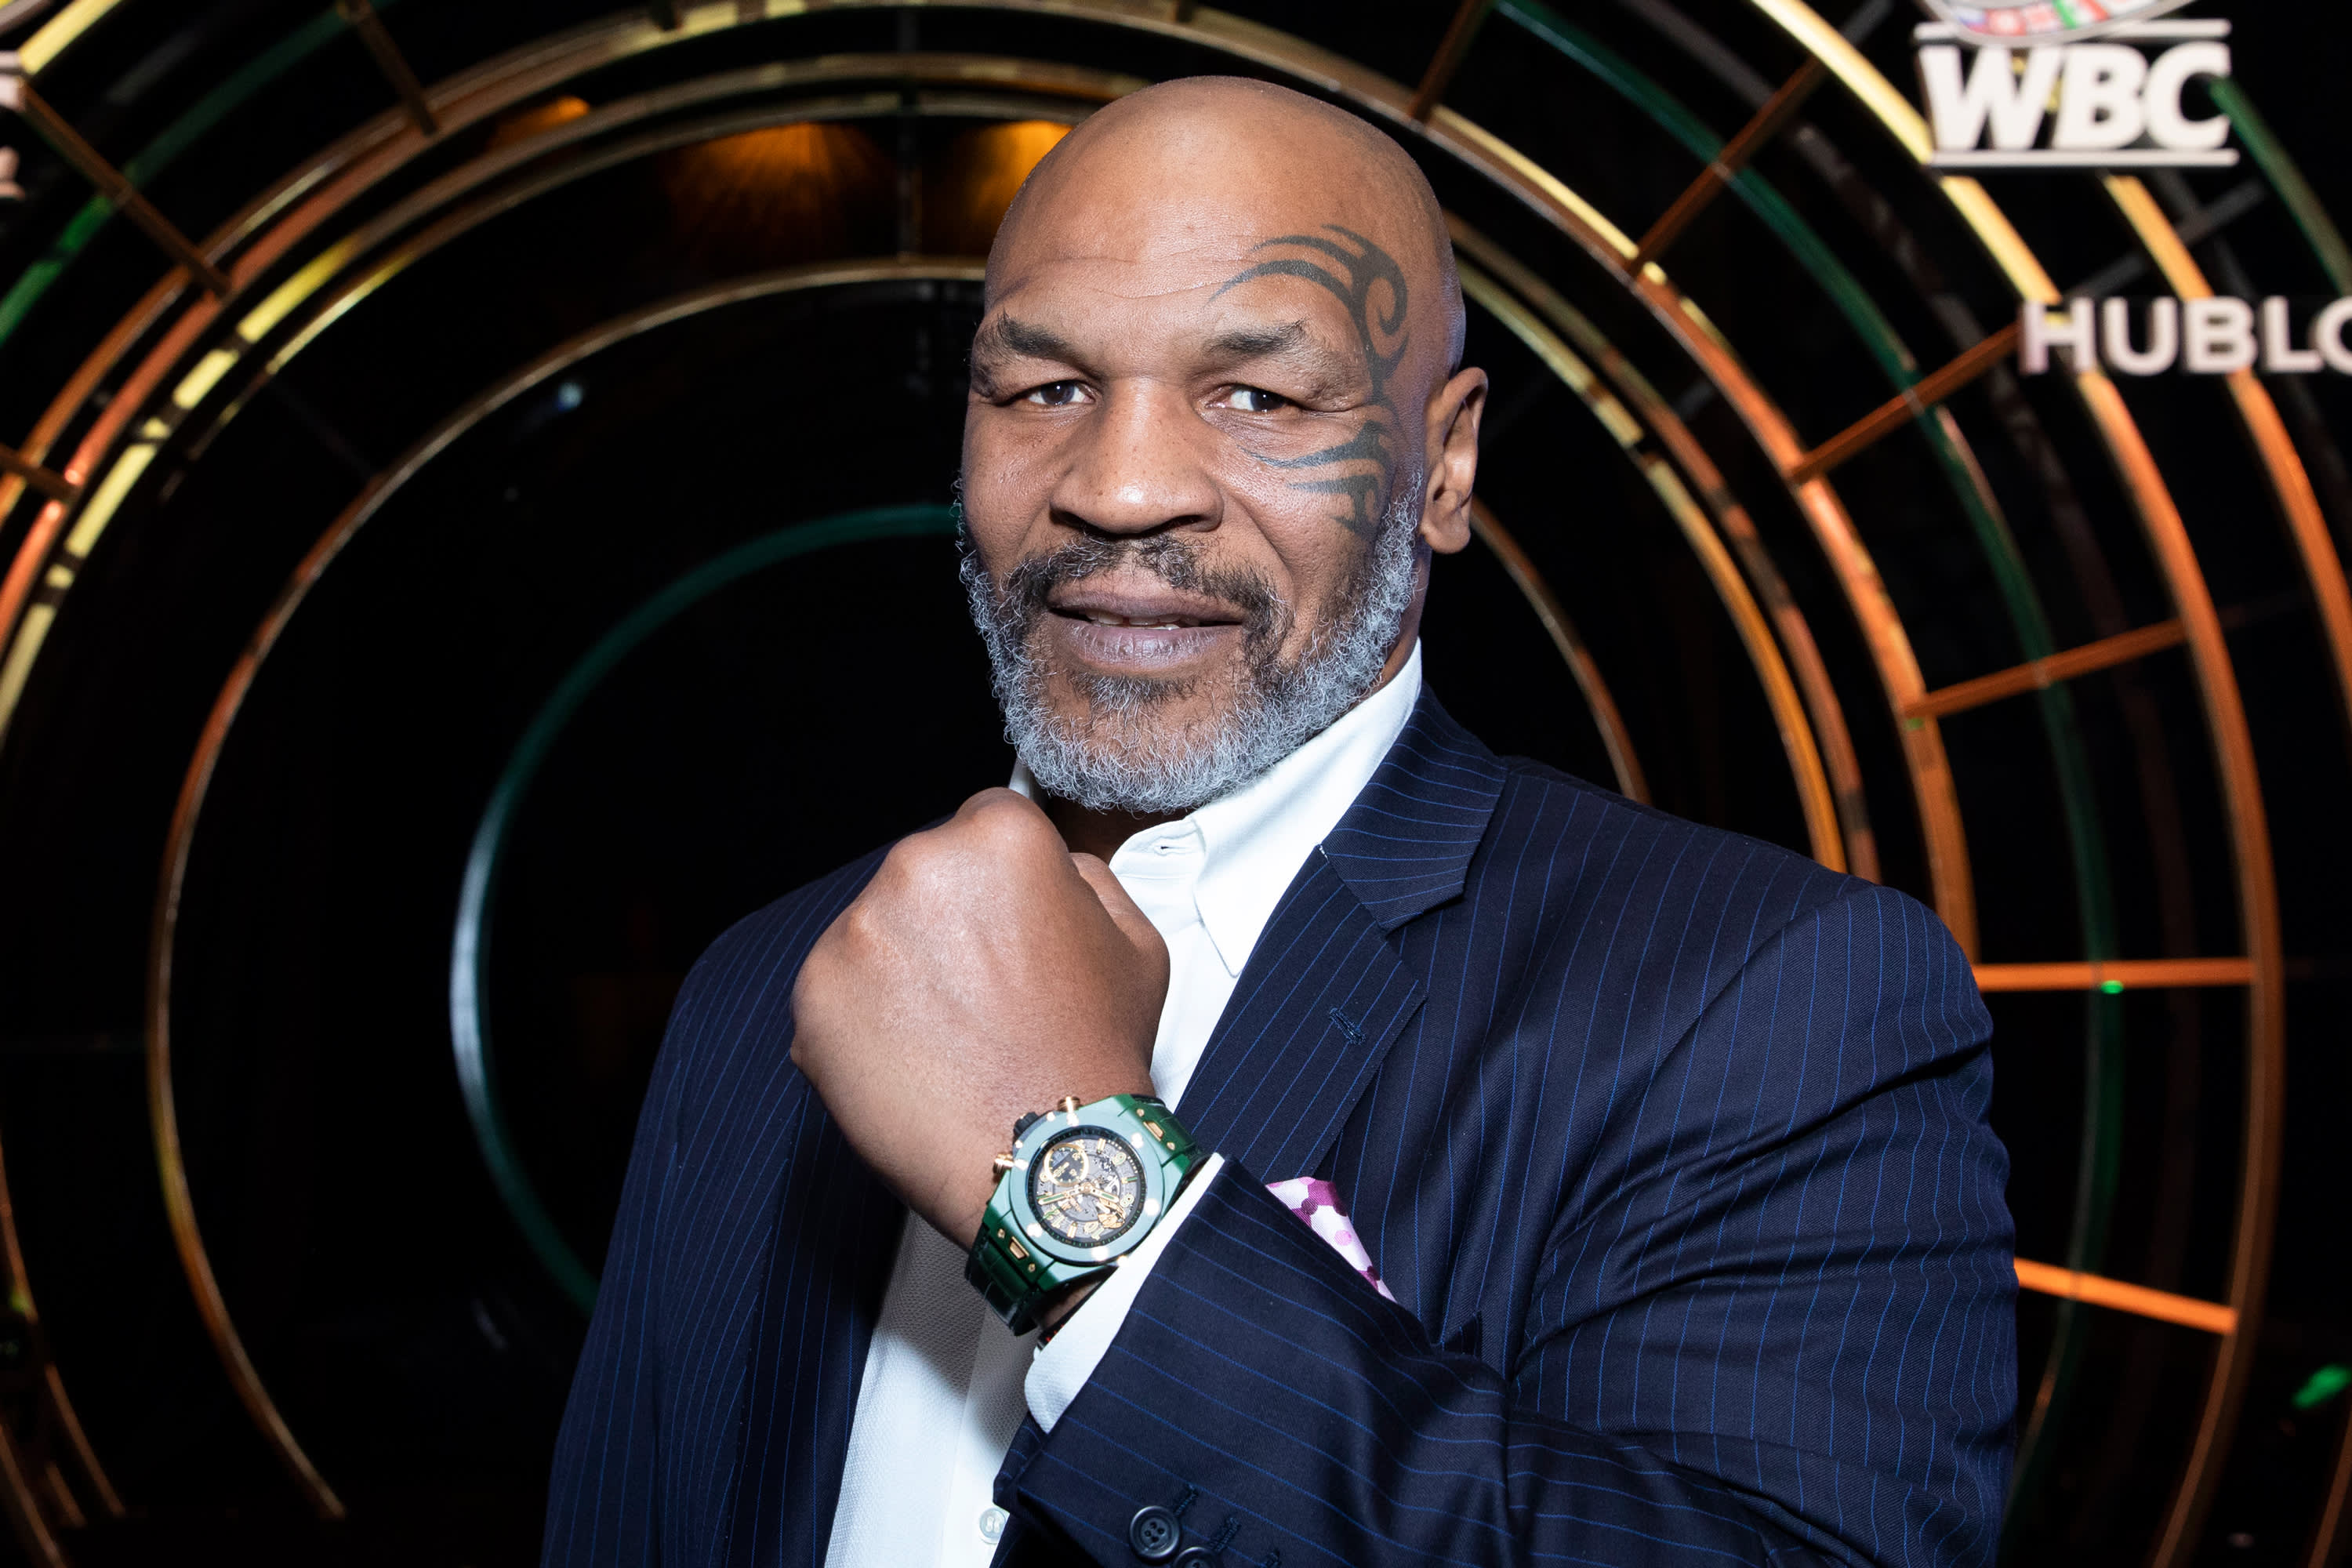 I use it for life Mike Tyson joins the list of celebrities launching a cannabis line